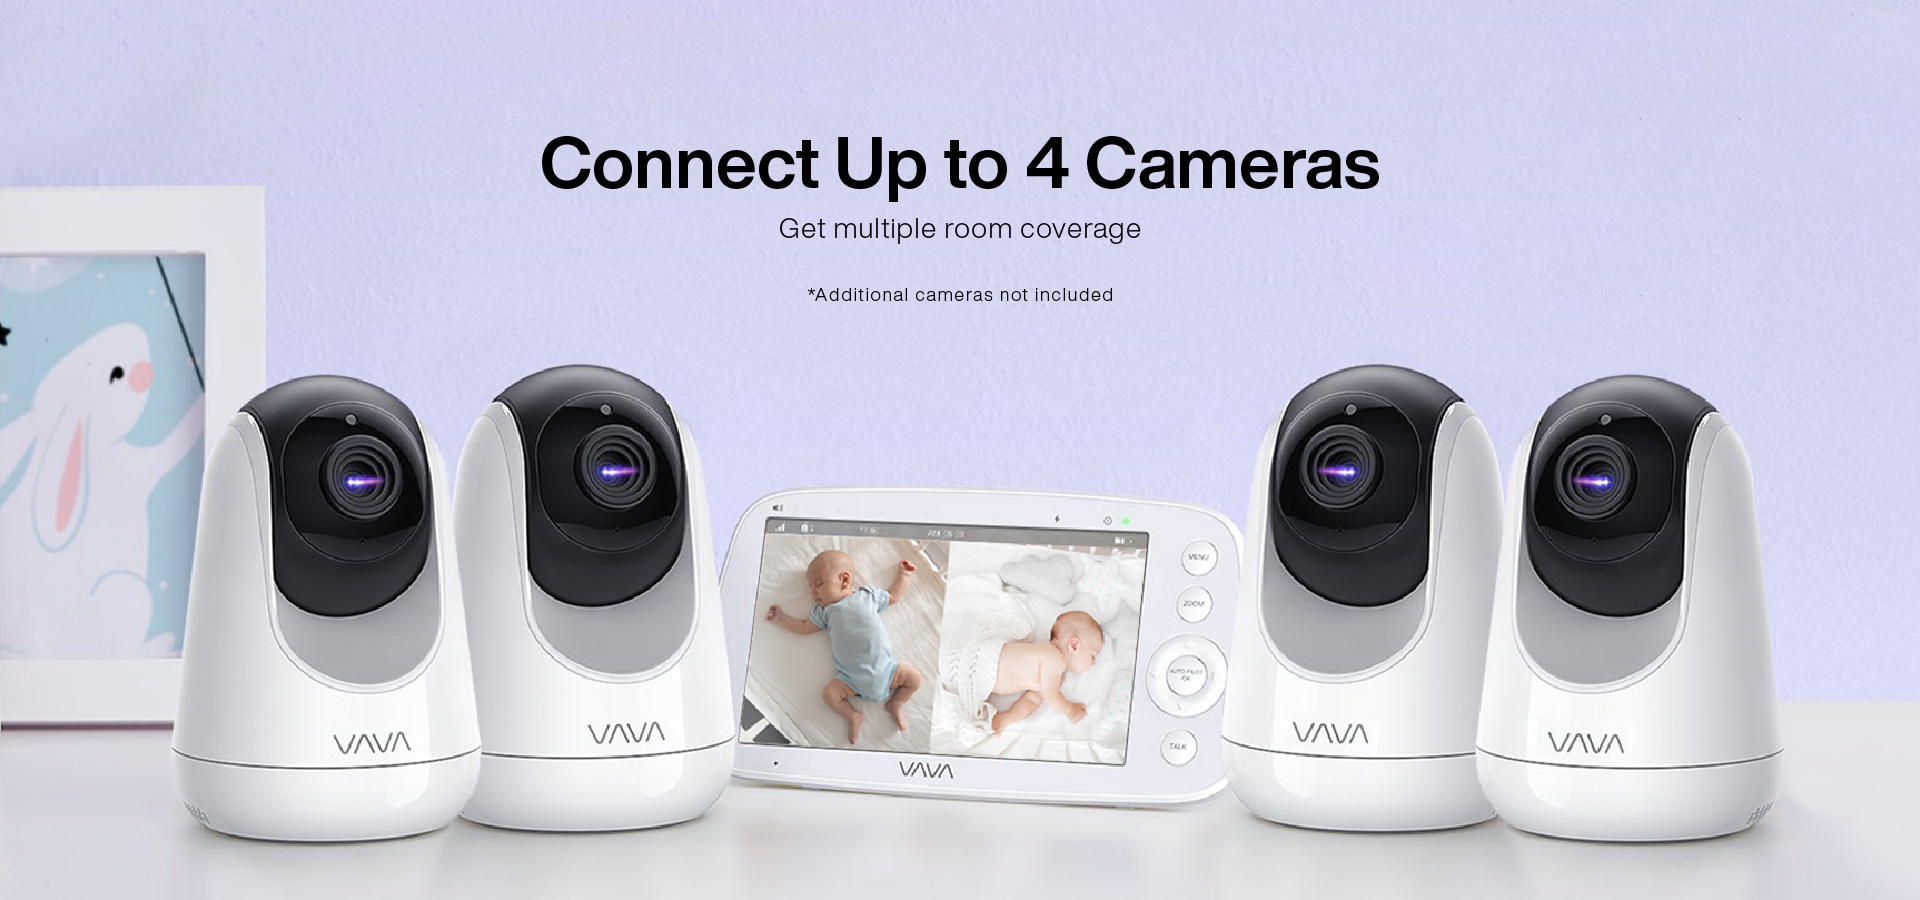 vava baby monitor is able to connect 4 cameras